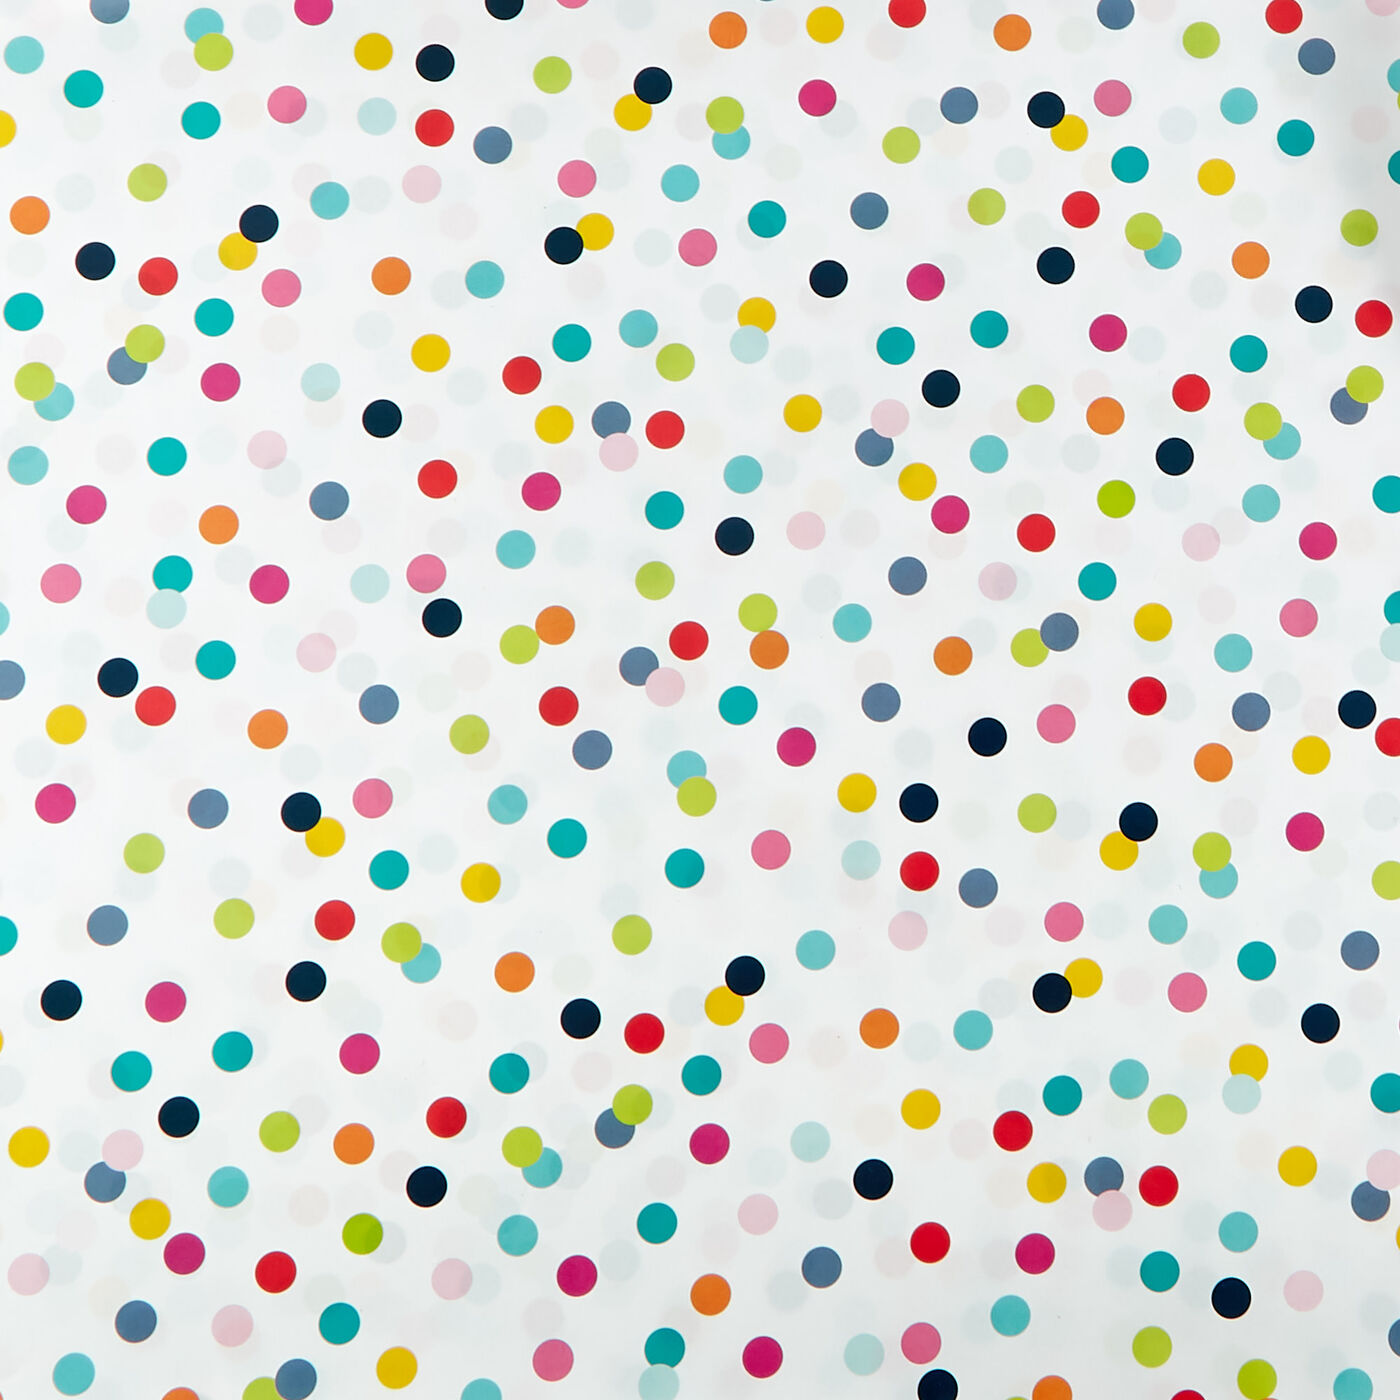 Buy Polka Dot Wrapping Paper - 24 Sheets for GBP 3.99 | Card Factory UK